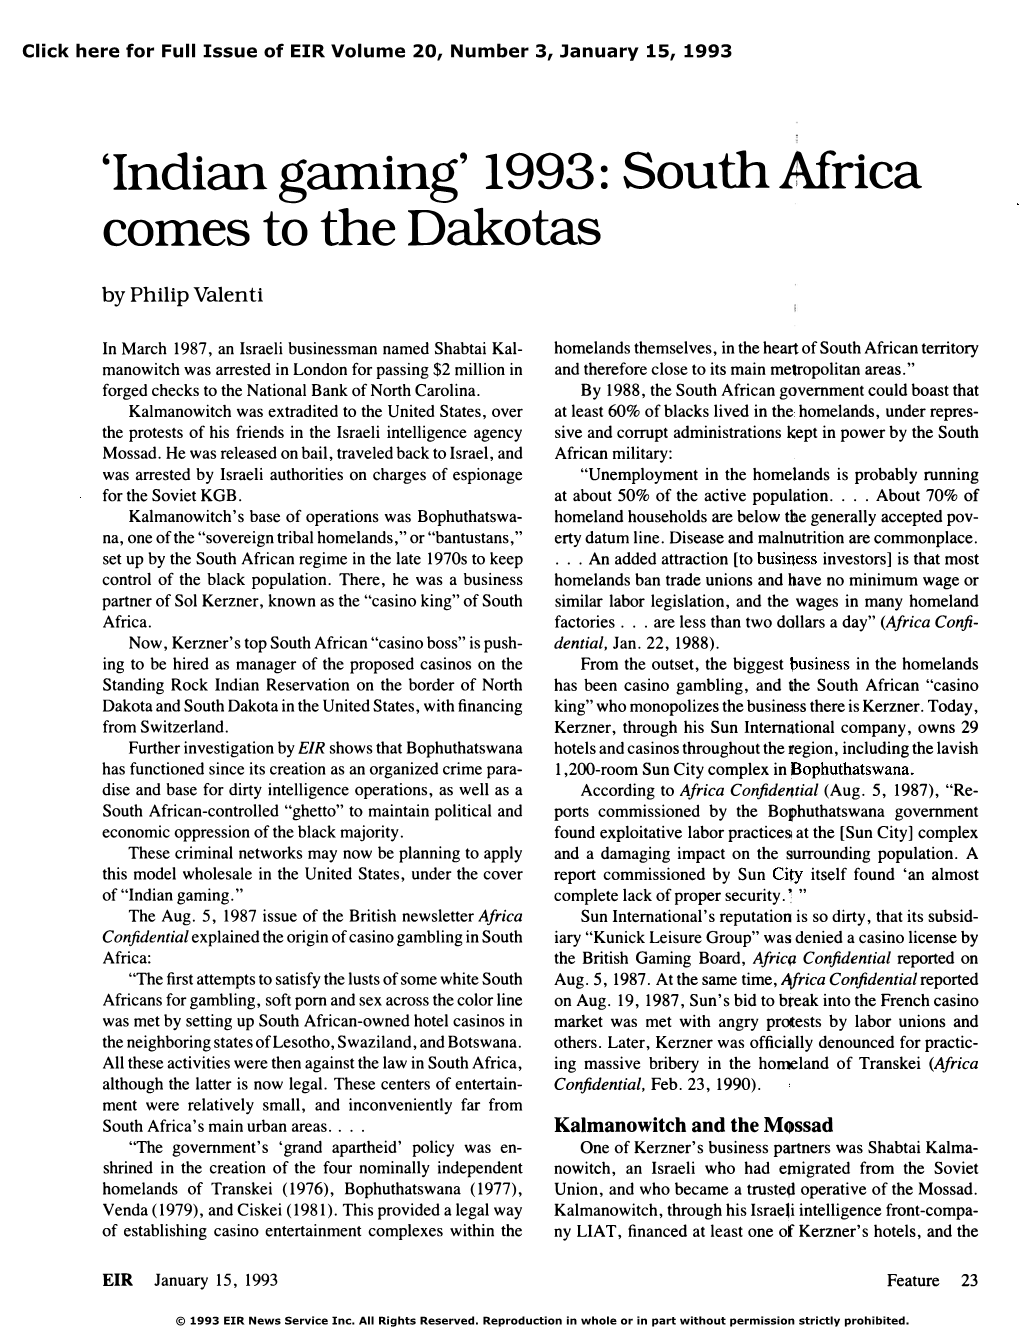 'Indian Gaming' 1993: South Africa Comes to the Dakotas